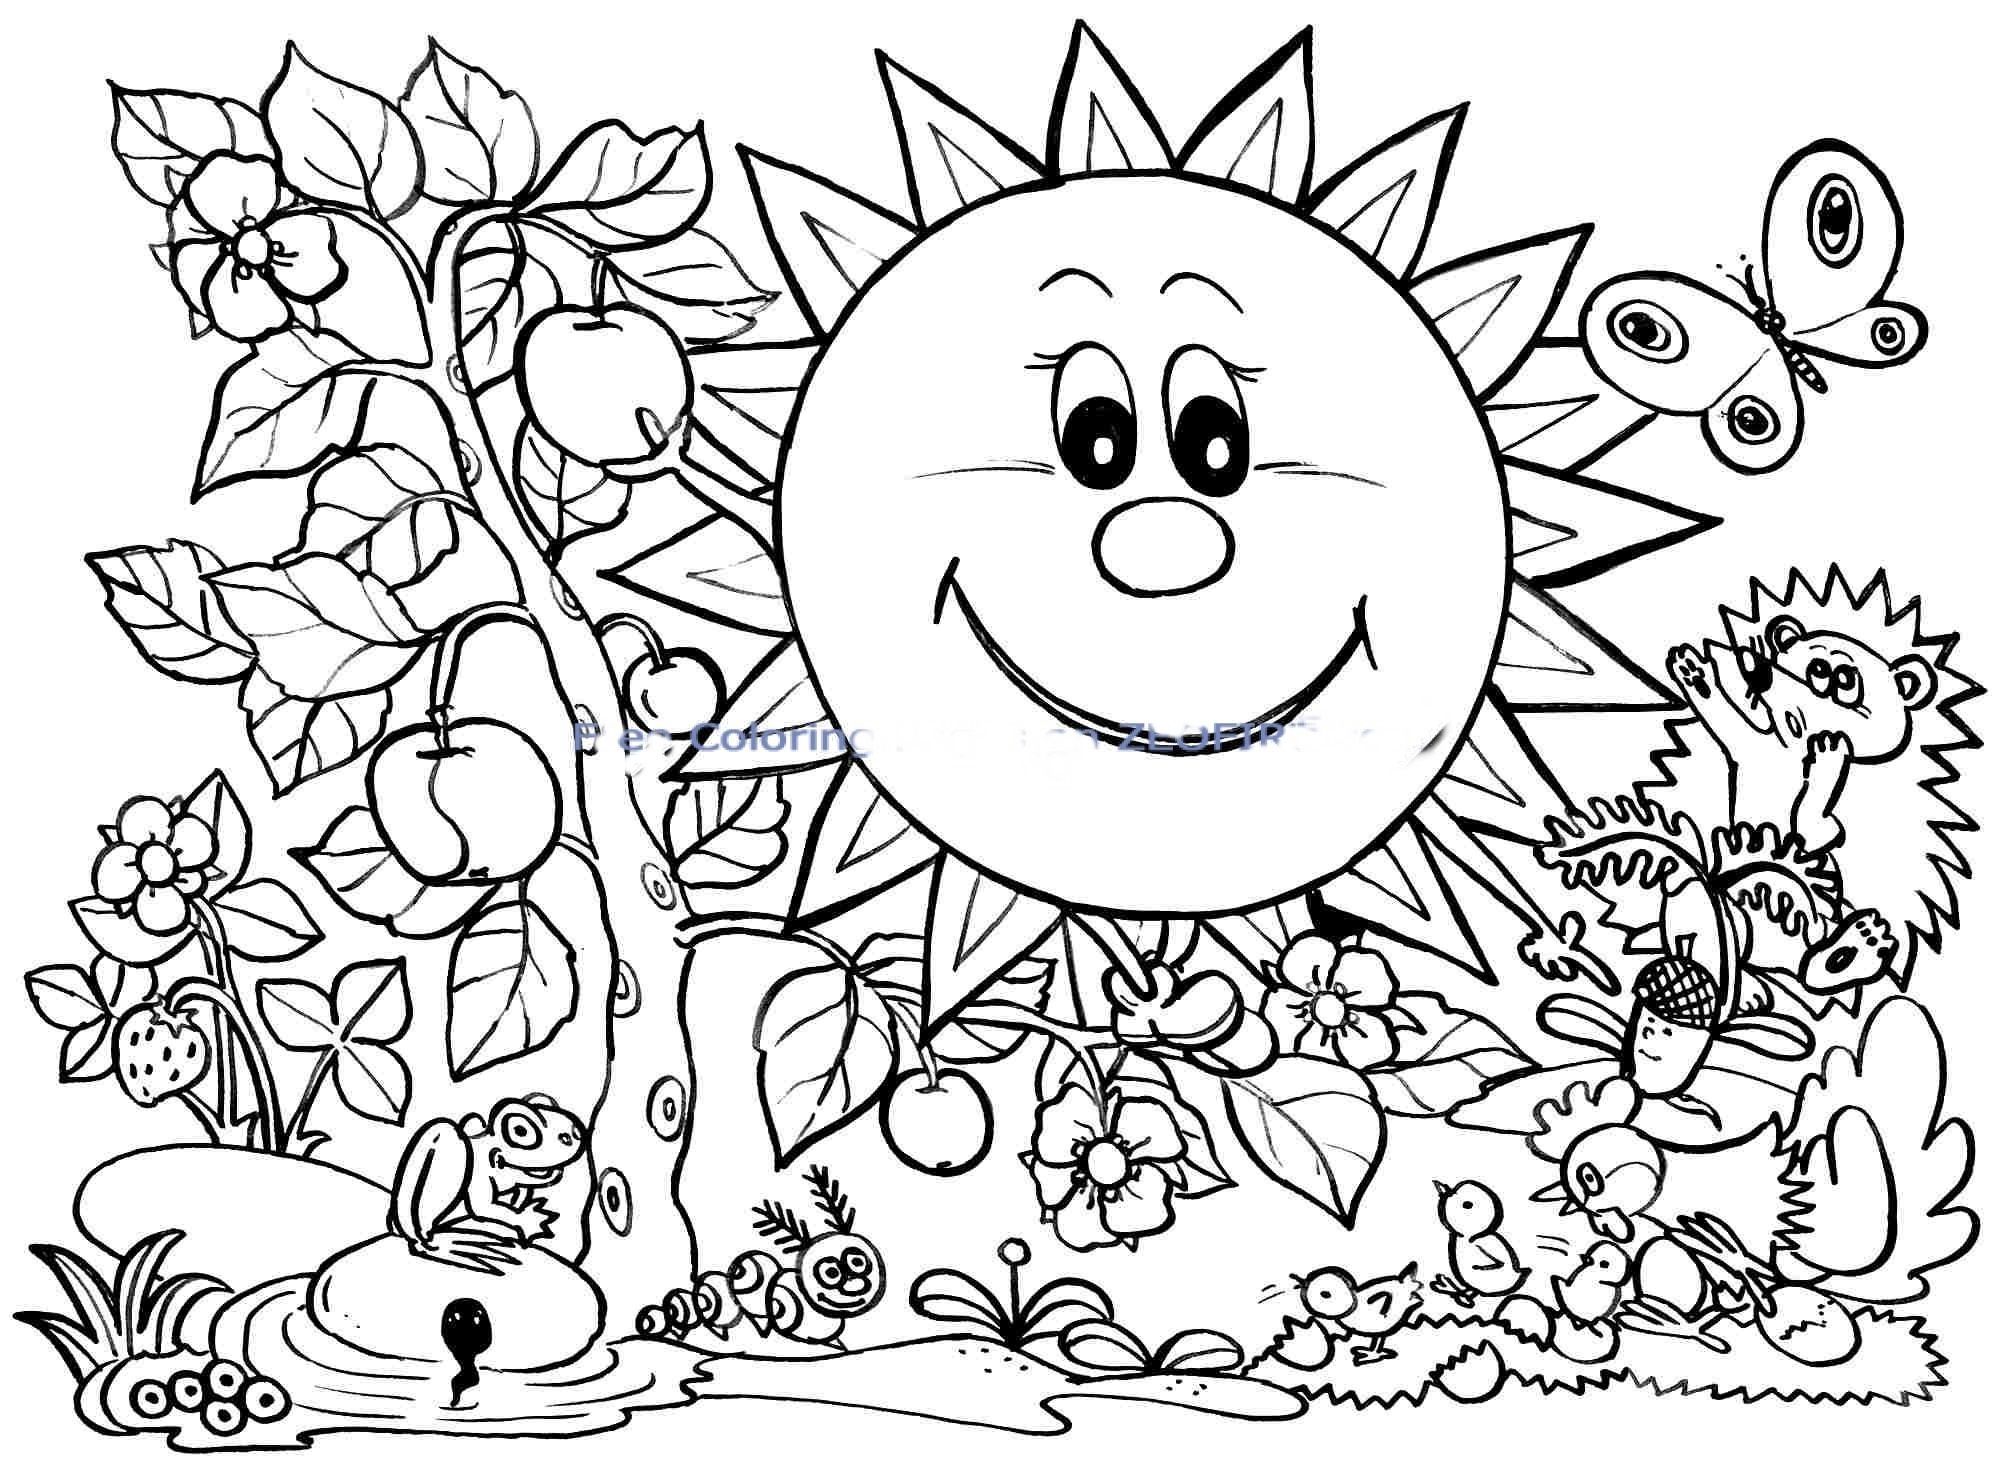 Spring Break Coloring Page - Coloring Home